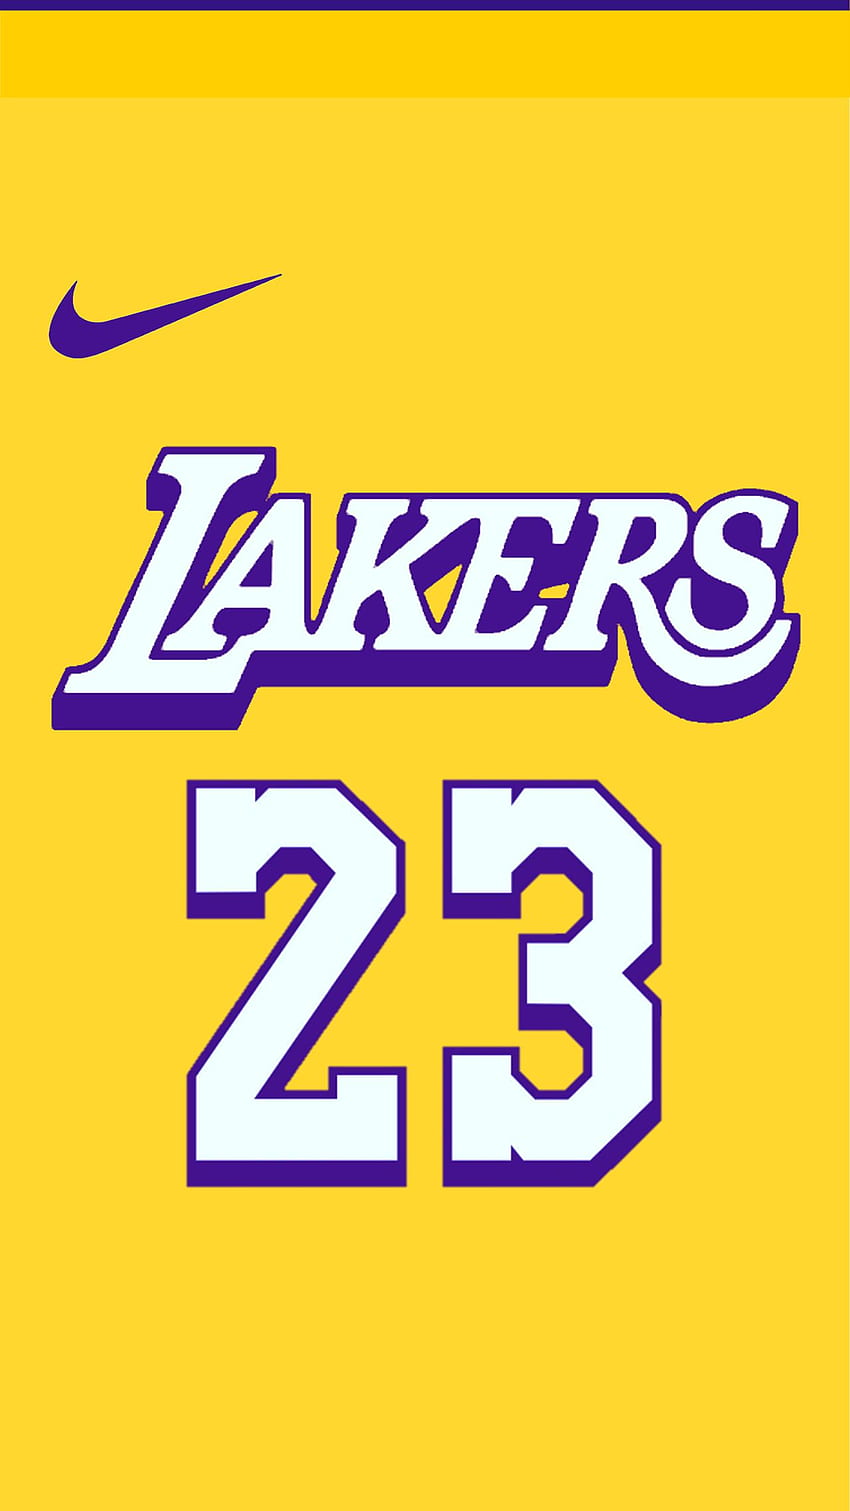 Los Angeles Lakers 2019 20 City Jersey im Jahr 2021. Lakers , Lakers-Logo, Los Angeles Lakers-Logo HD-Handy-Hintergrundbild